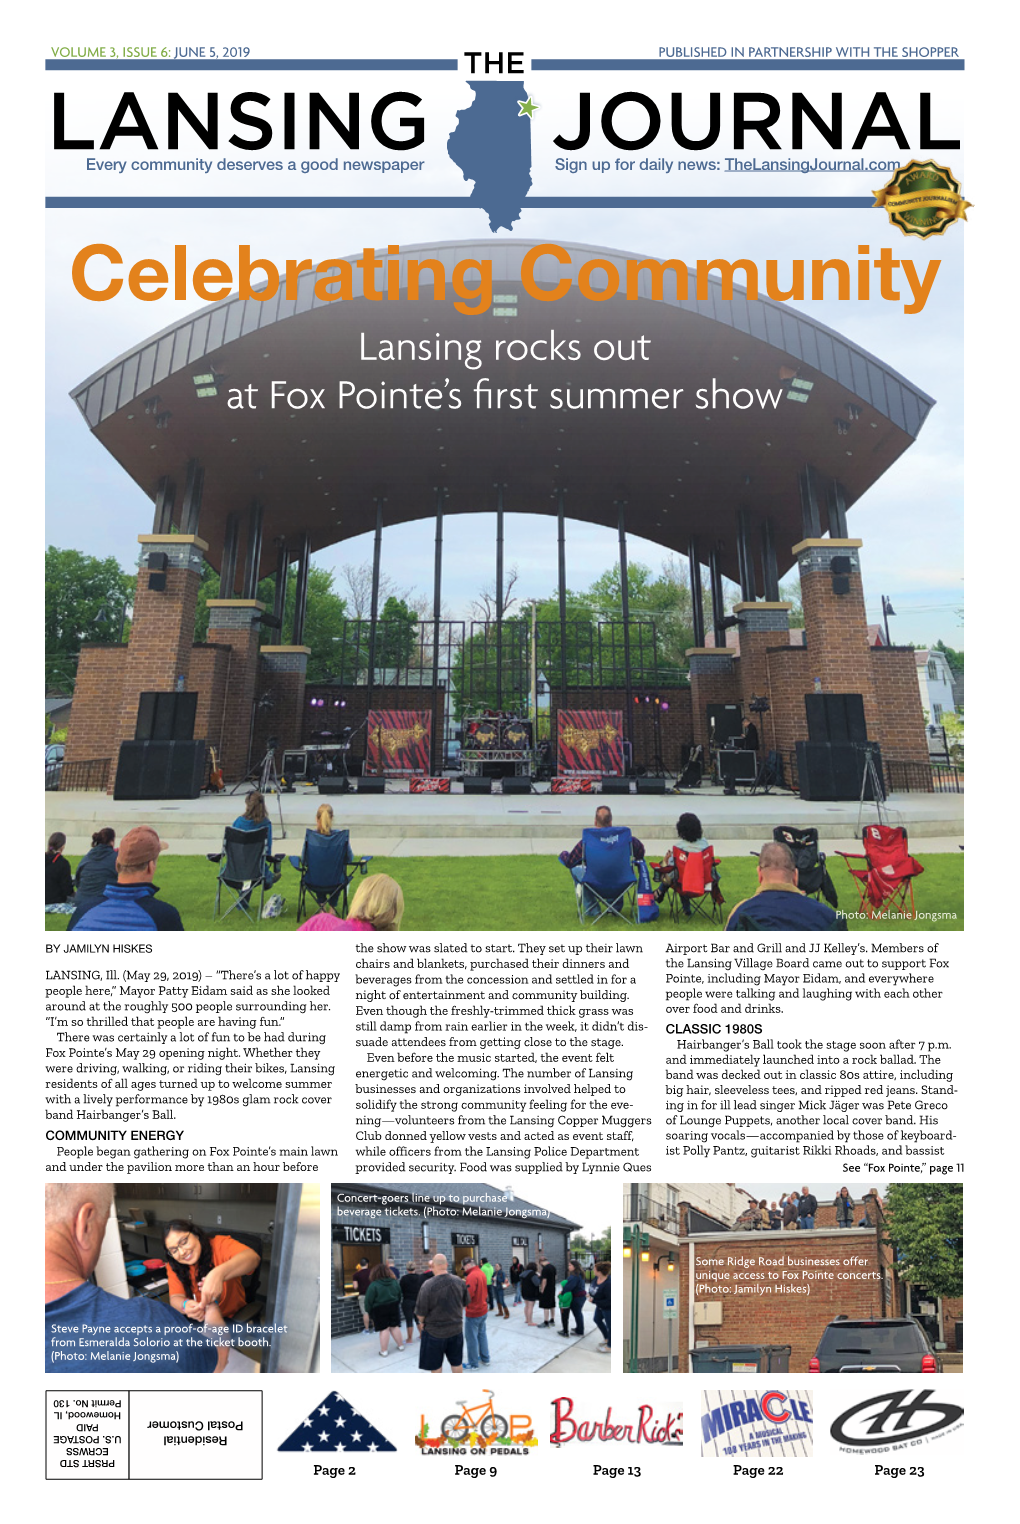 June 5, 2019 the Published in Partnership with the Shopper Lansing Journal Every Community Deserves a Good Newspaper Sign up for Daily News: Thelansingjournal.Com